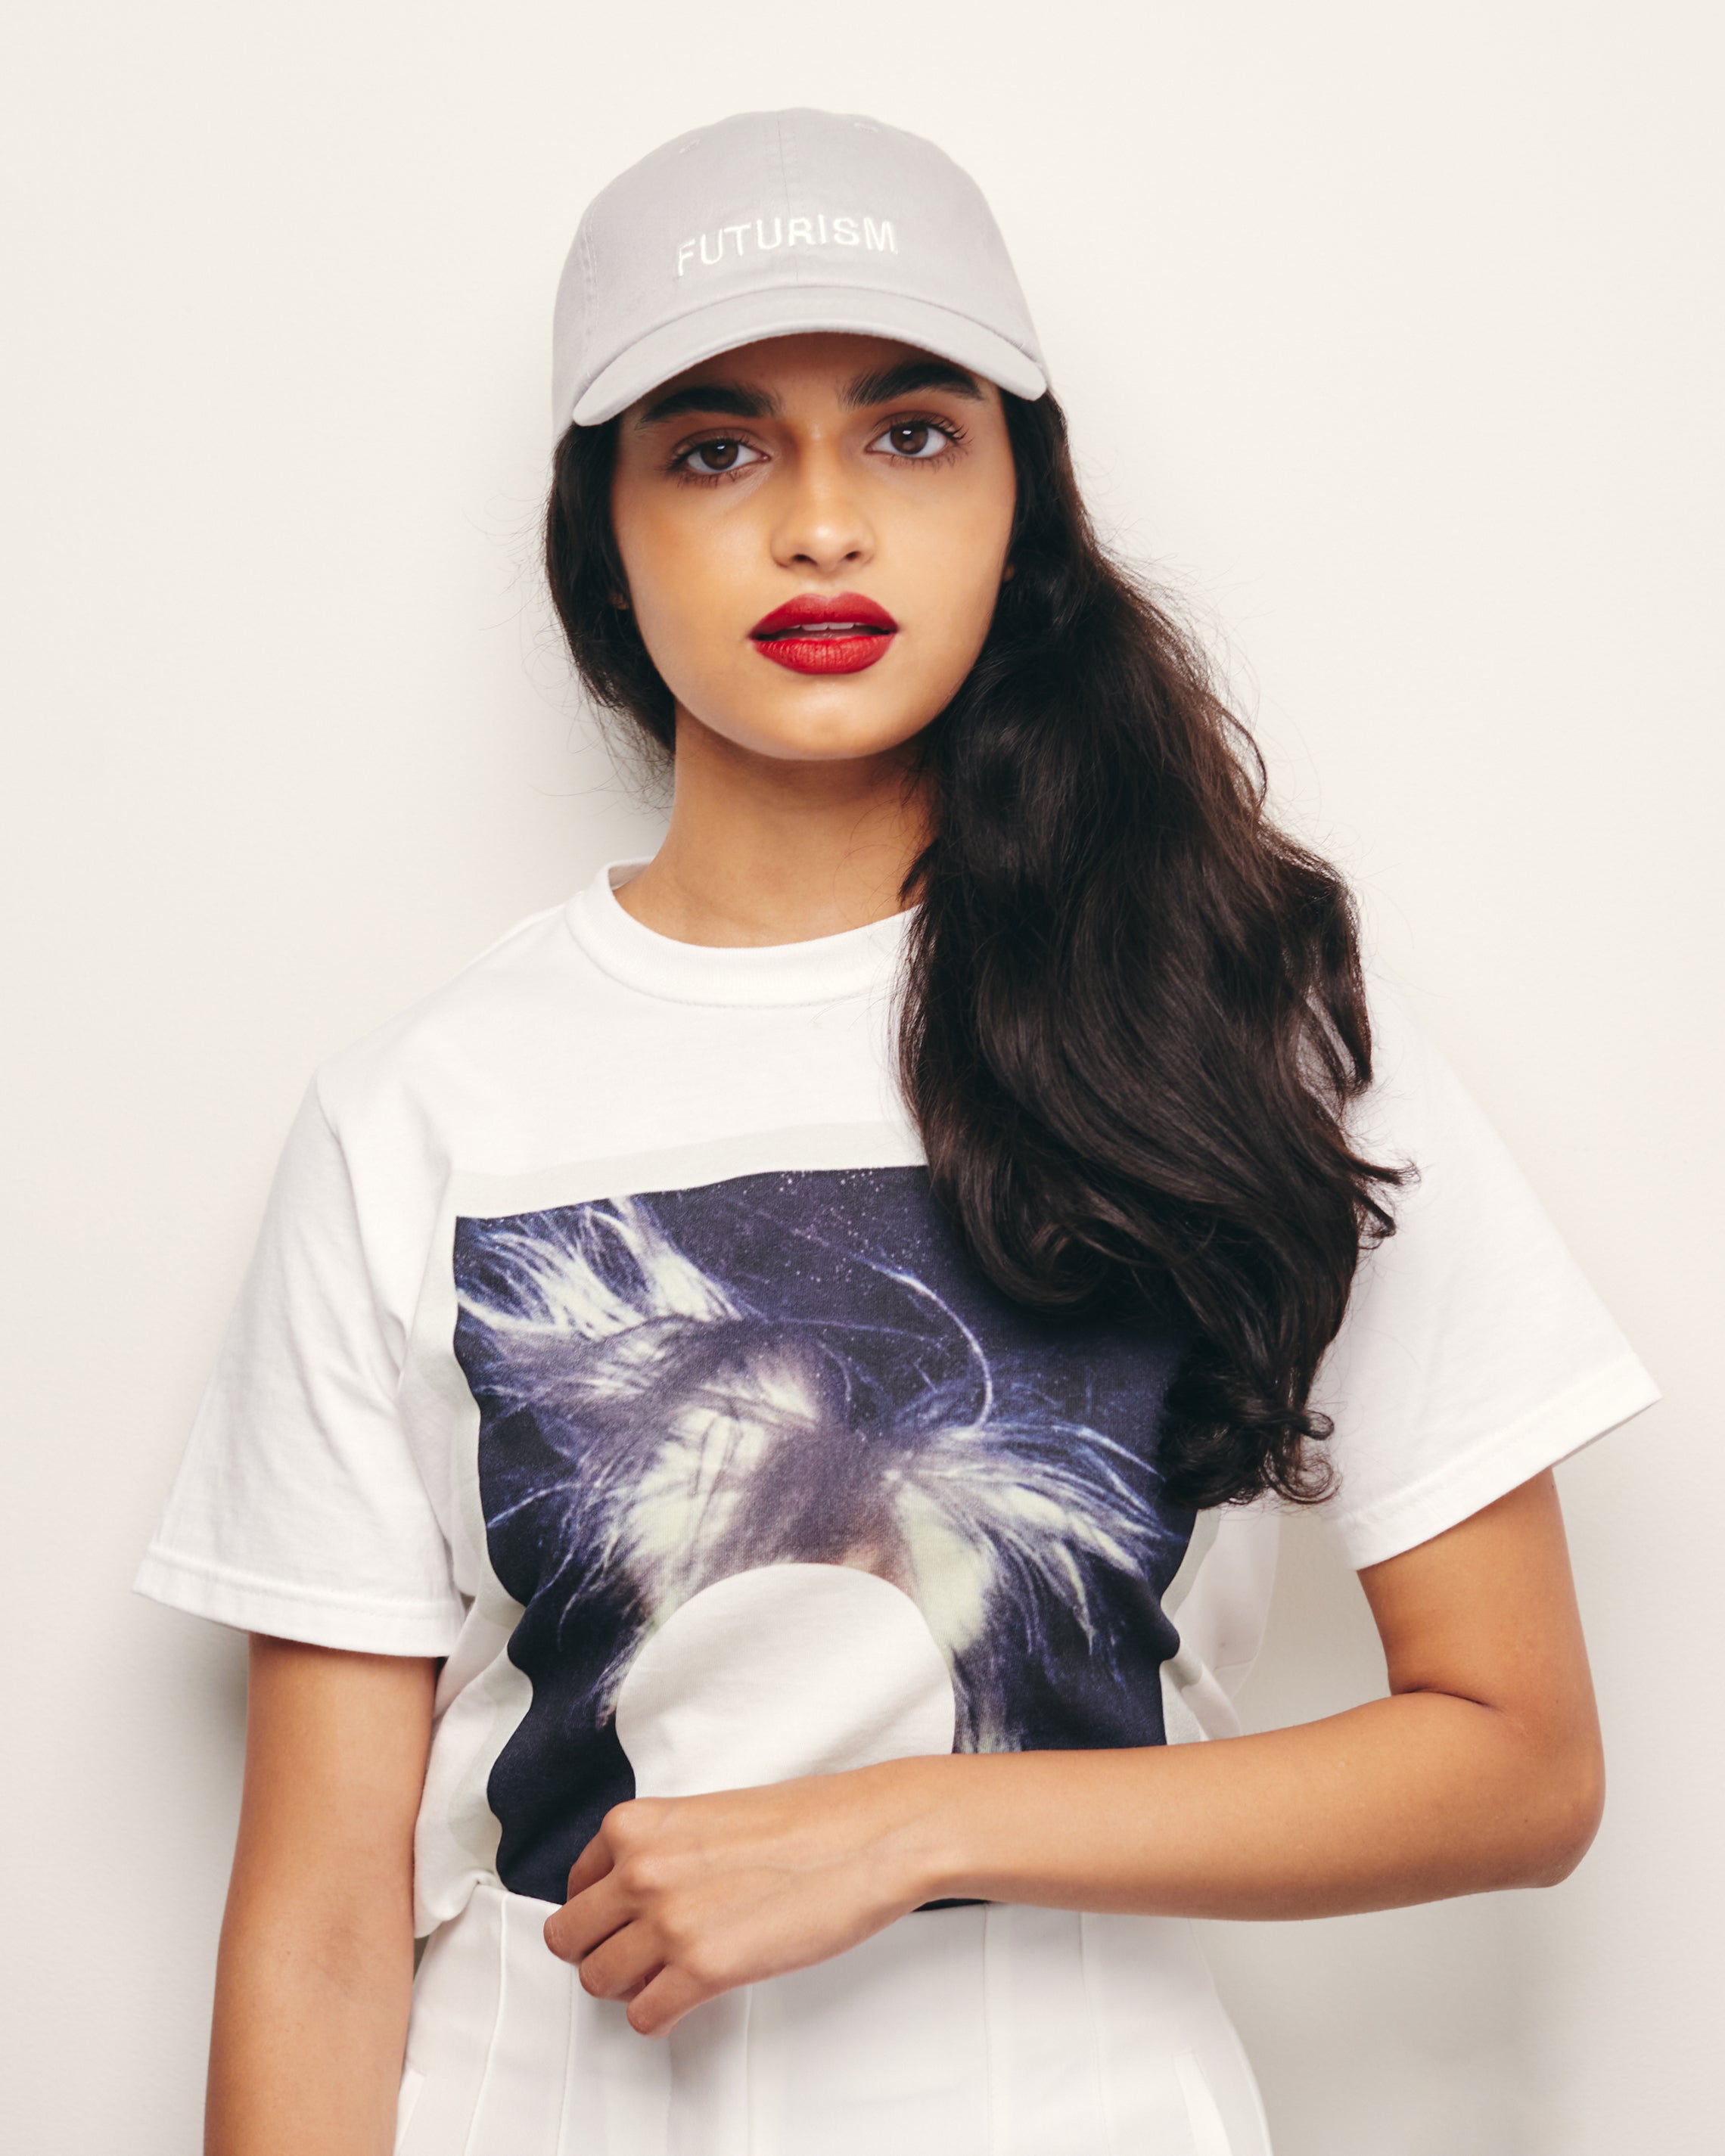 Mira Bhat wears Black / Charcoal Organic Short Sleeve 100% Cotton Tee with  graphic print of Andy Warhol’s Self Portrait Polaroid embellished with a John Baldessari white dot. 